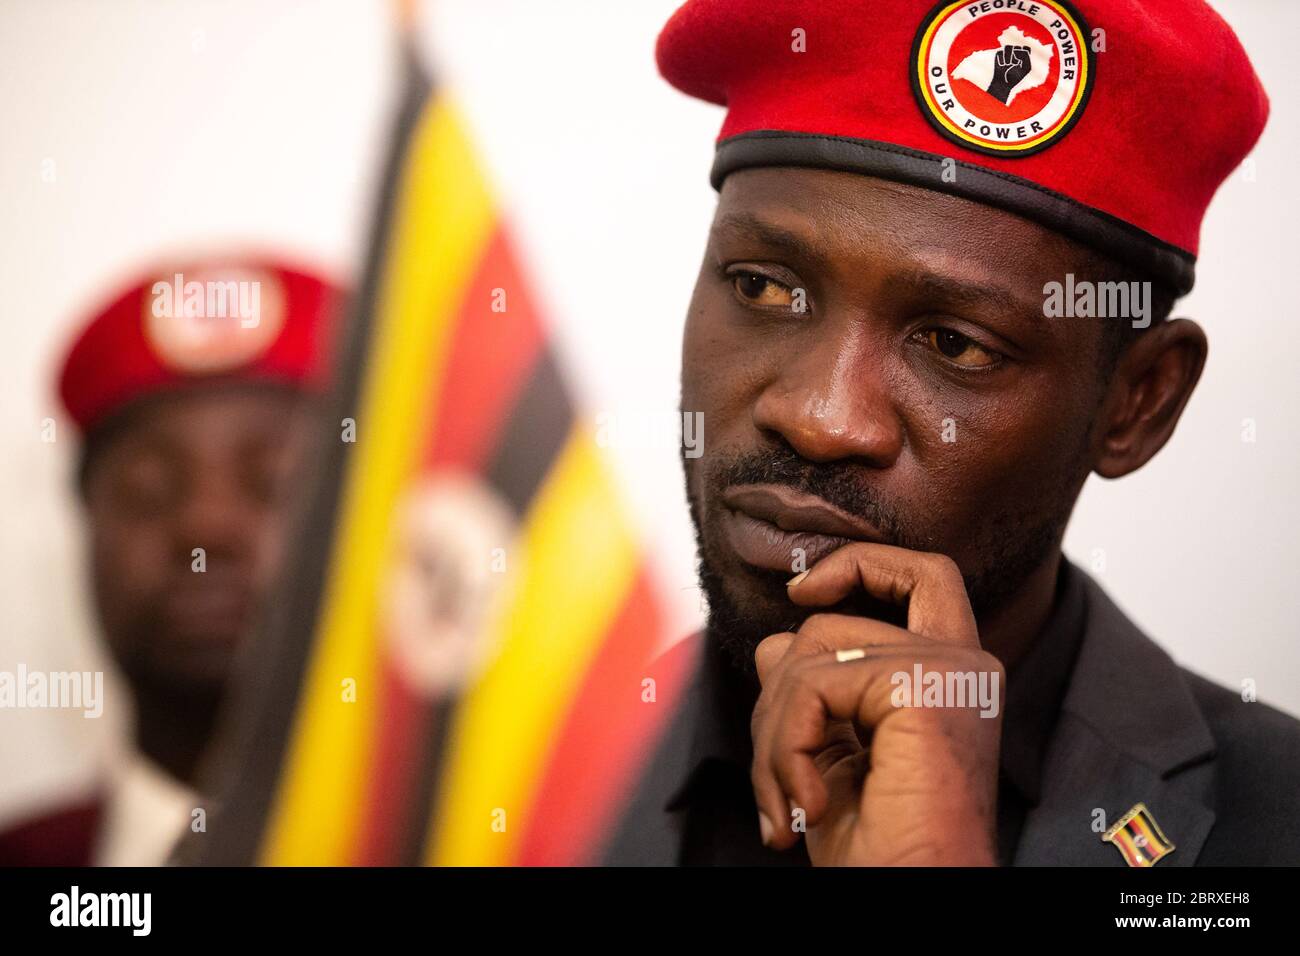 Bobi Wine addresses the press at his recording studio February 20 2020 in Kampala, Uganda. Bobi Wine, whose real name is Robert Kyagulanyi Ssentamu, is a popstar and opposition leader under the 'People Power' campaign. In July 2019 he was announced that he will take on Uganda's longstanding president Yoweri Museveni in the 2021 election. Stock Photo